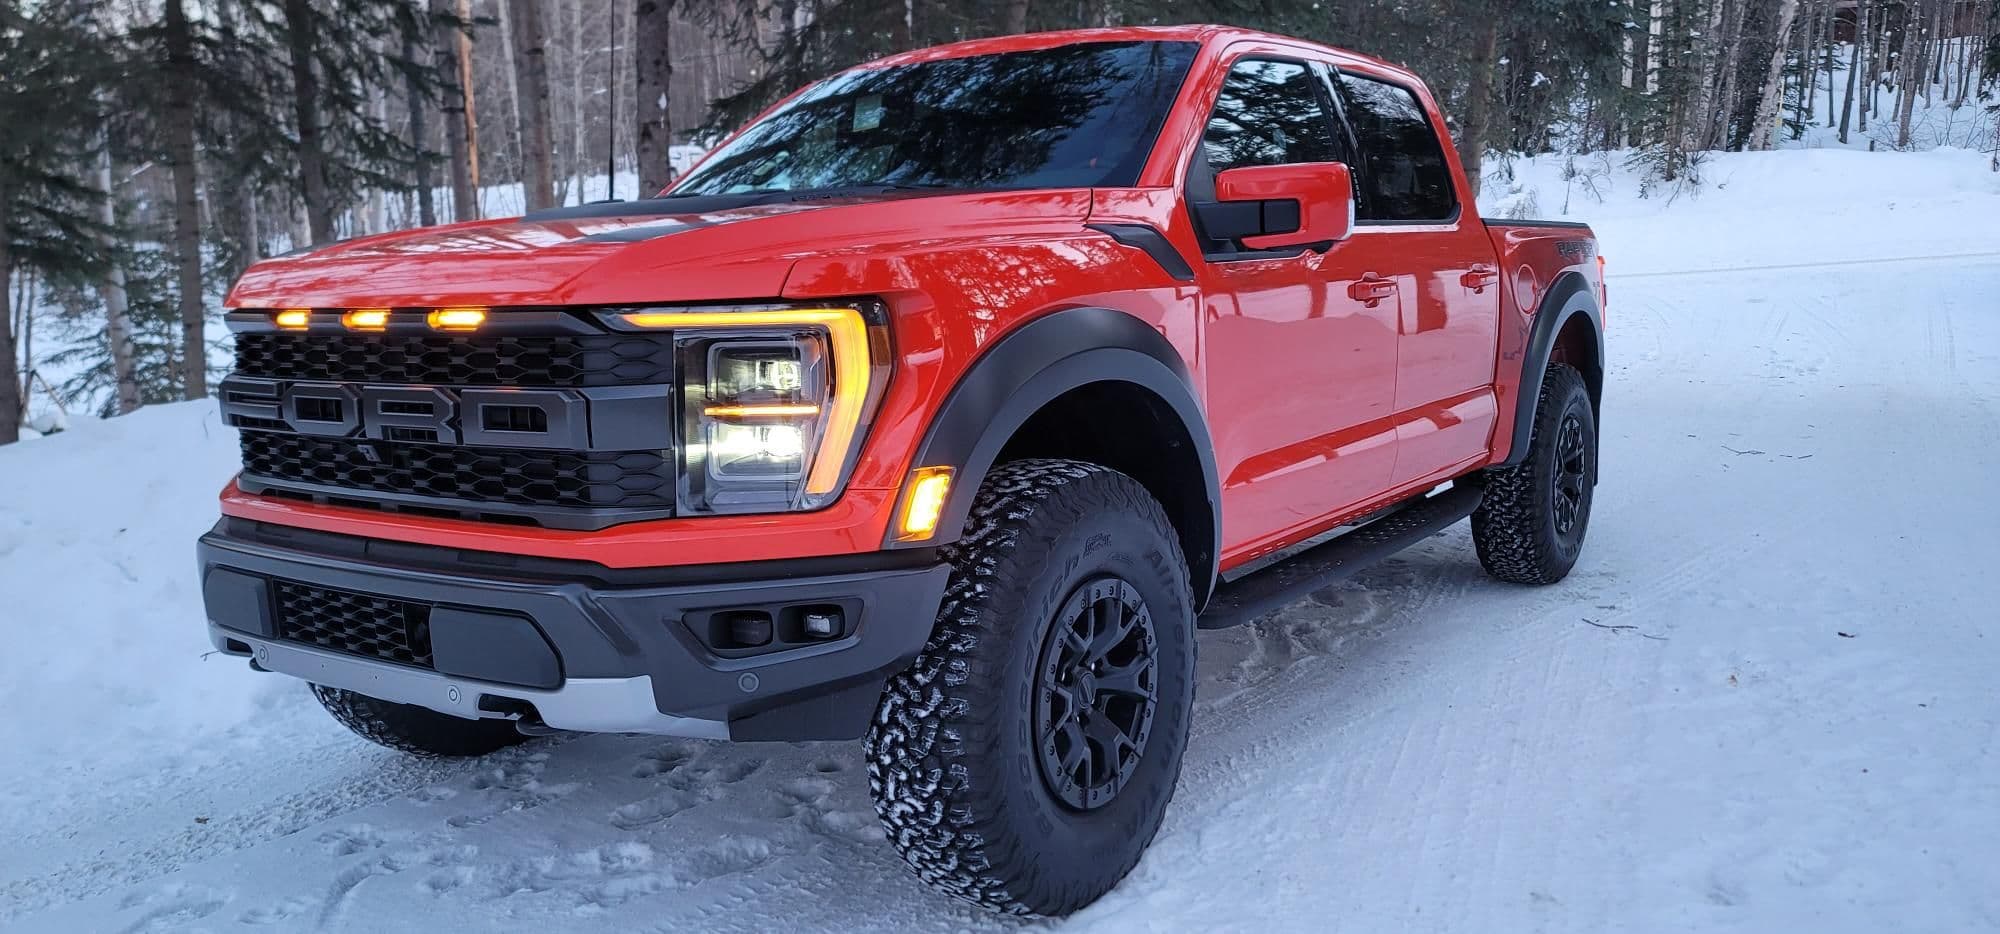 New '23 Raptor 37 - Ford F150 Forum - Community of Ford Truck Fans